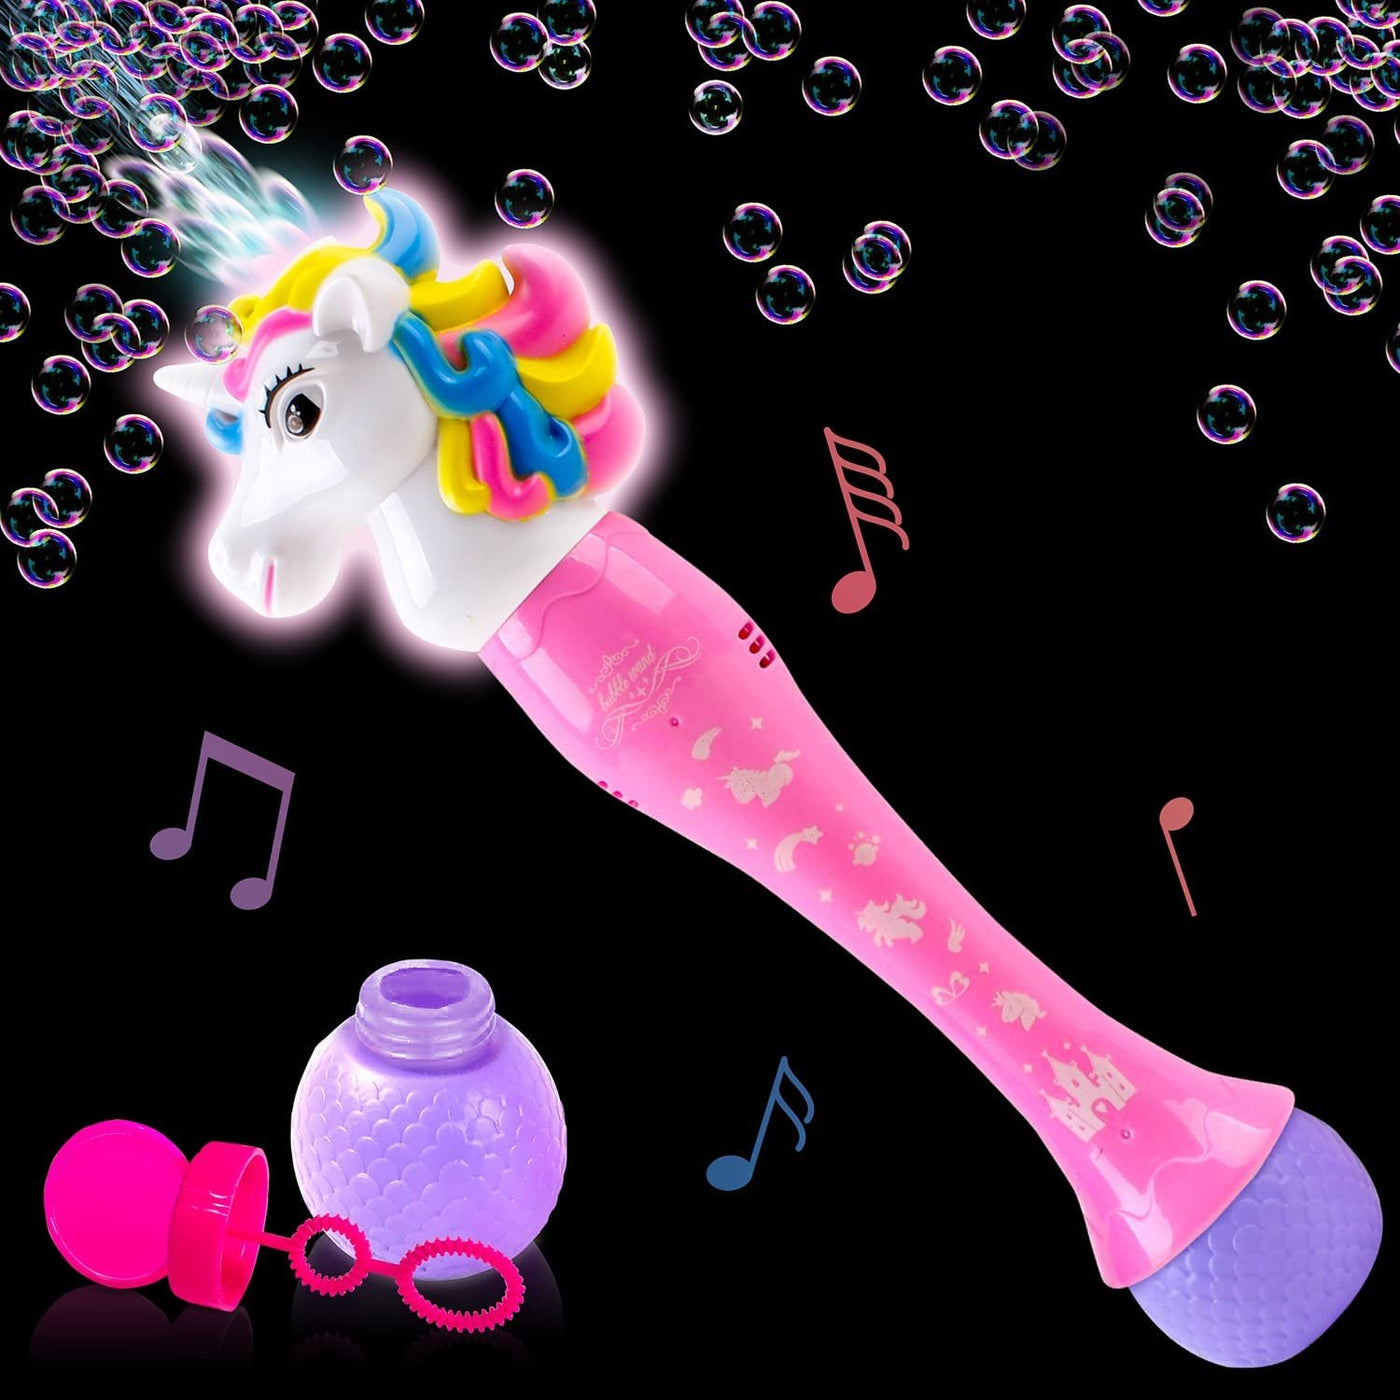 ArtCreativity Light Up Unicorn Bubble Blower Wand, 14 Inch Illuminating Bubble Blower Wand with Thrilling LED & Sound Effects for Kids, Bubble Fluid & Batteries Included, Great Gift Idea, Party Favor